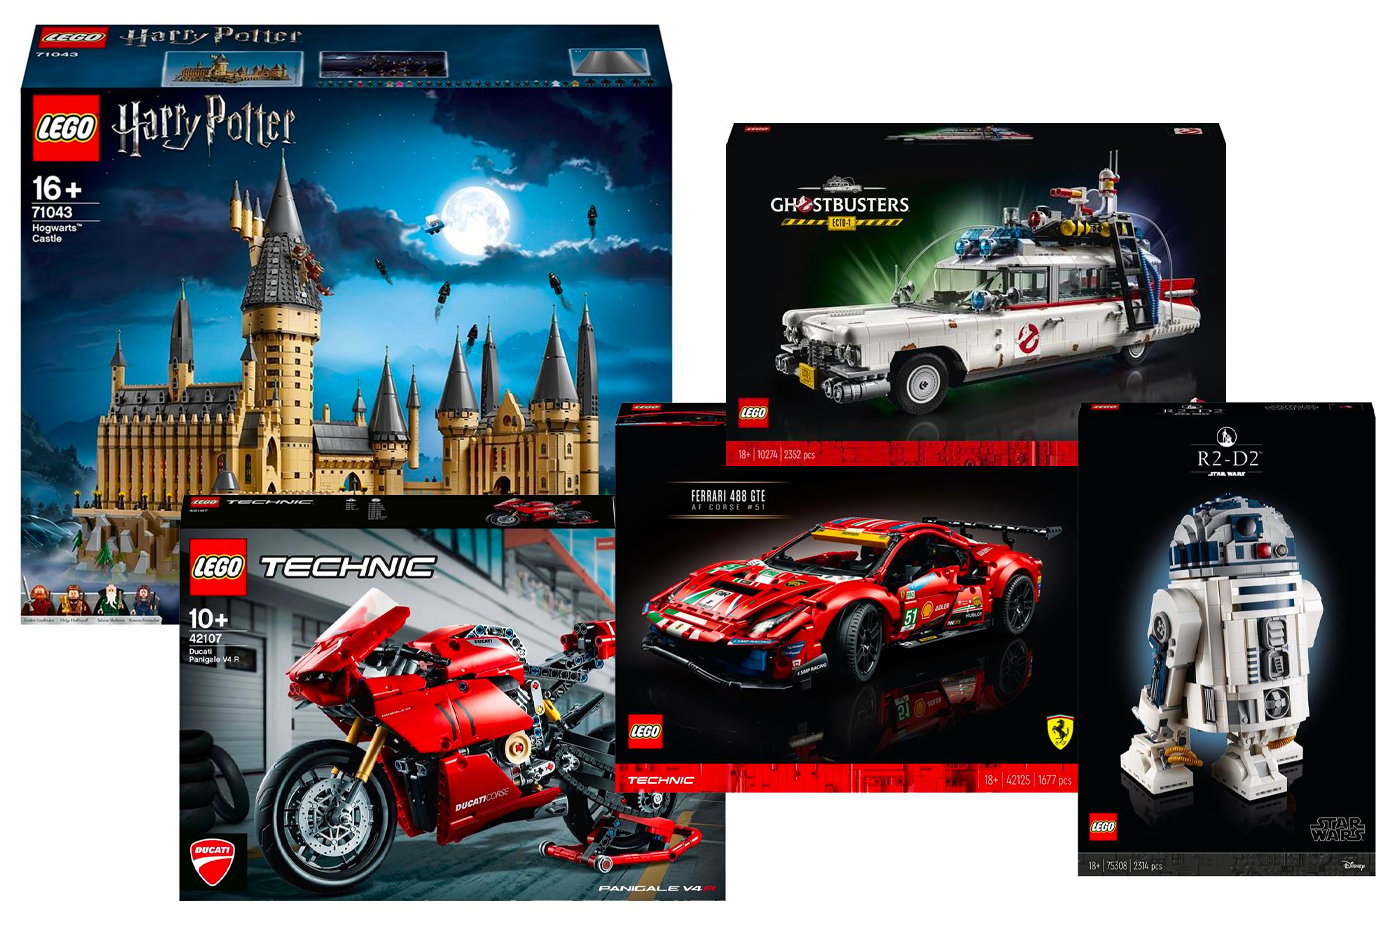 Thanks to this promo code, save 20 on a selection of LEGO sets